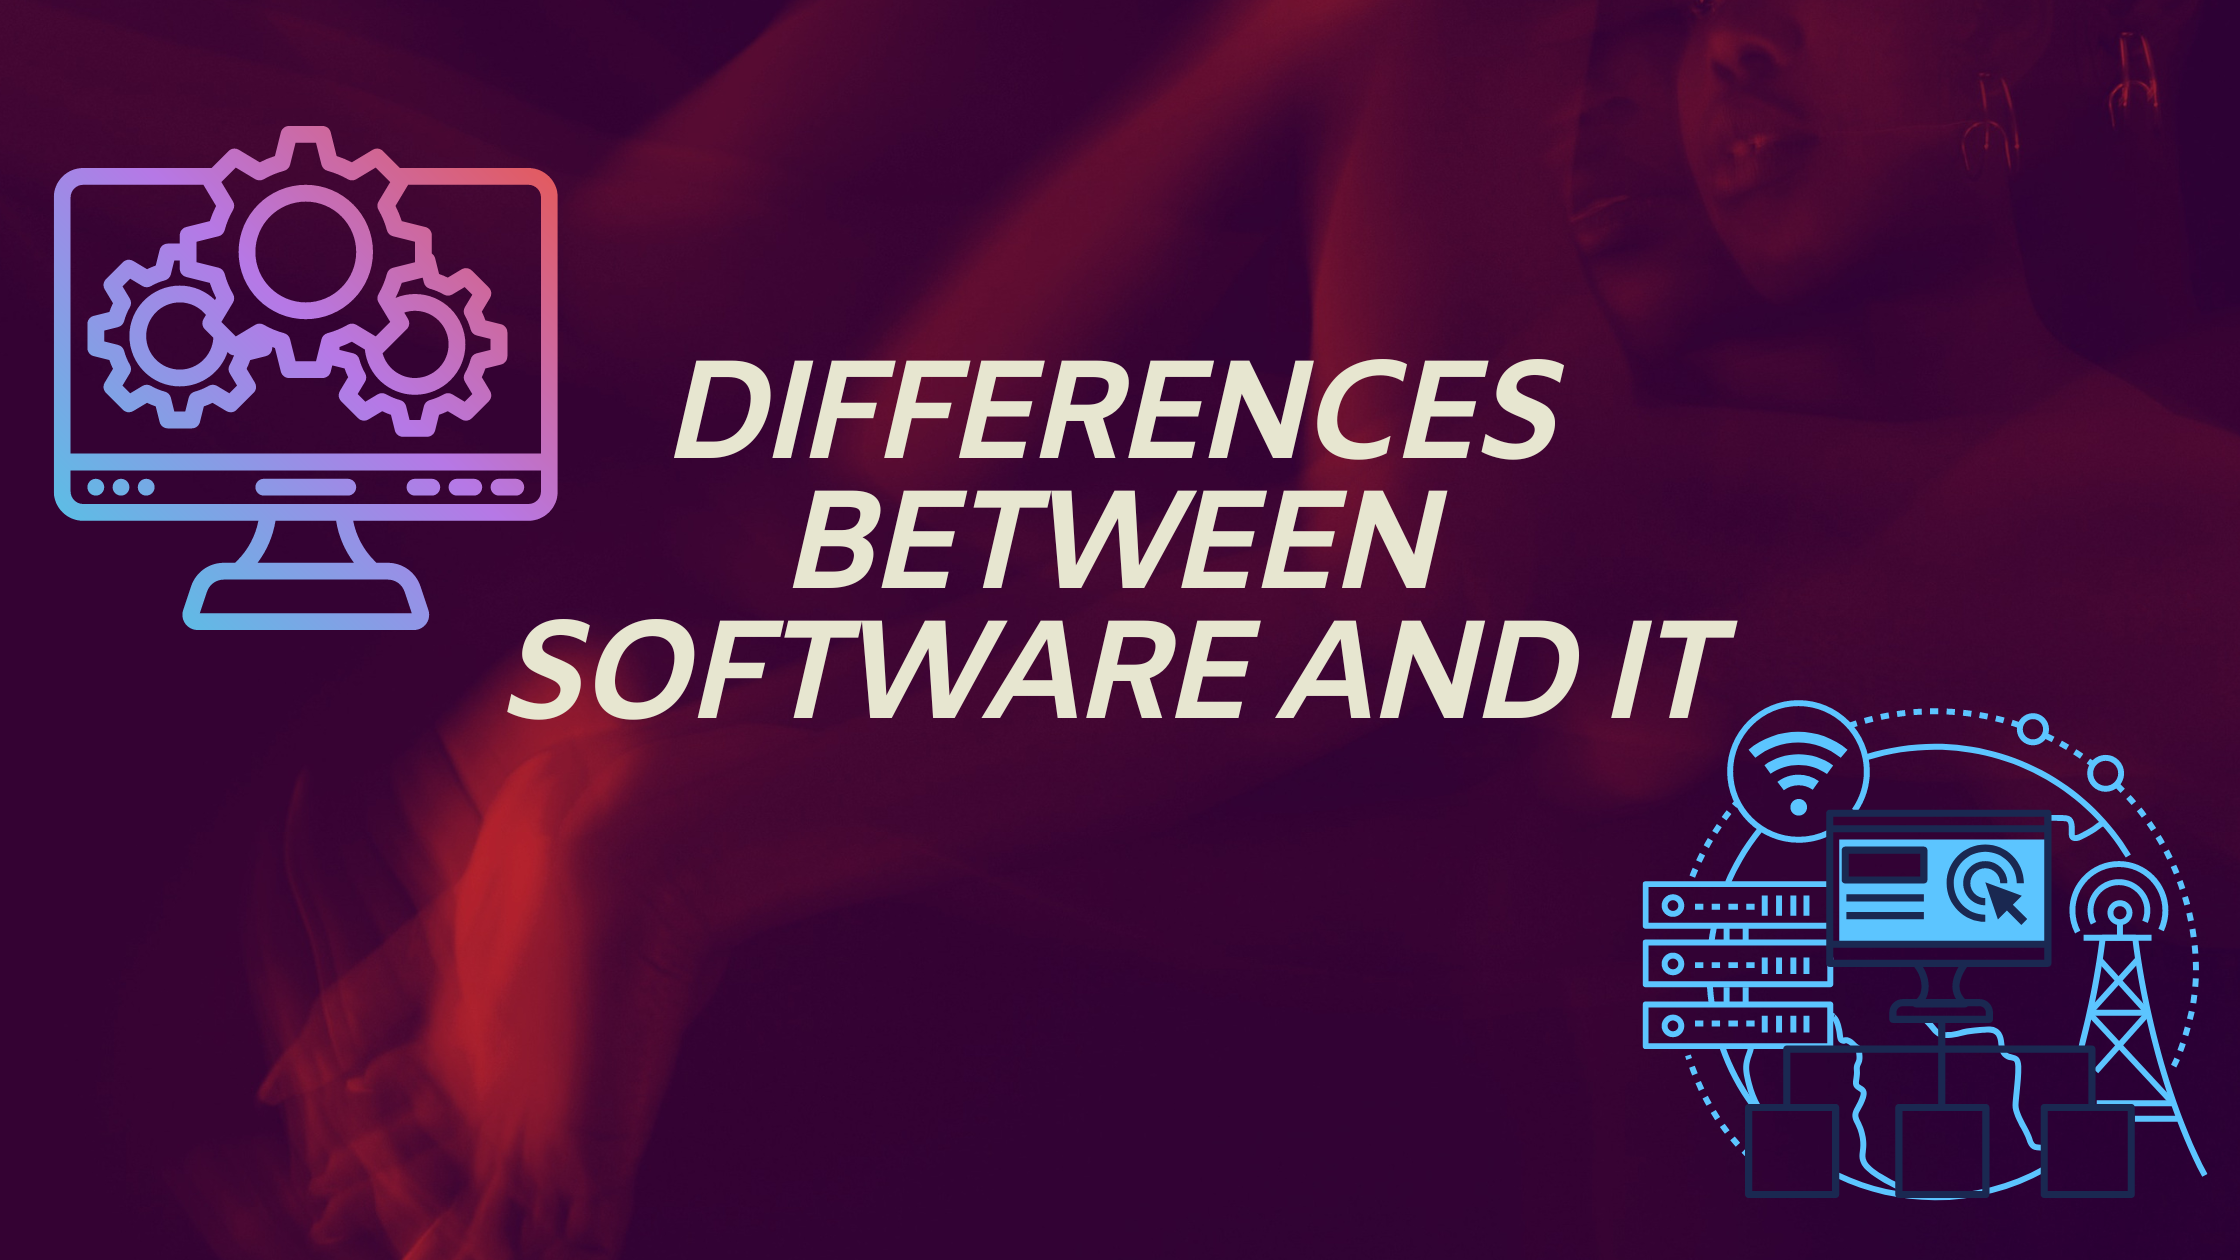 Differences Between It and Software: